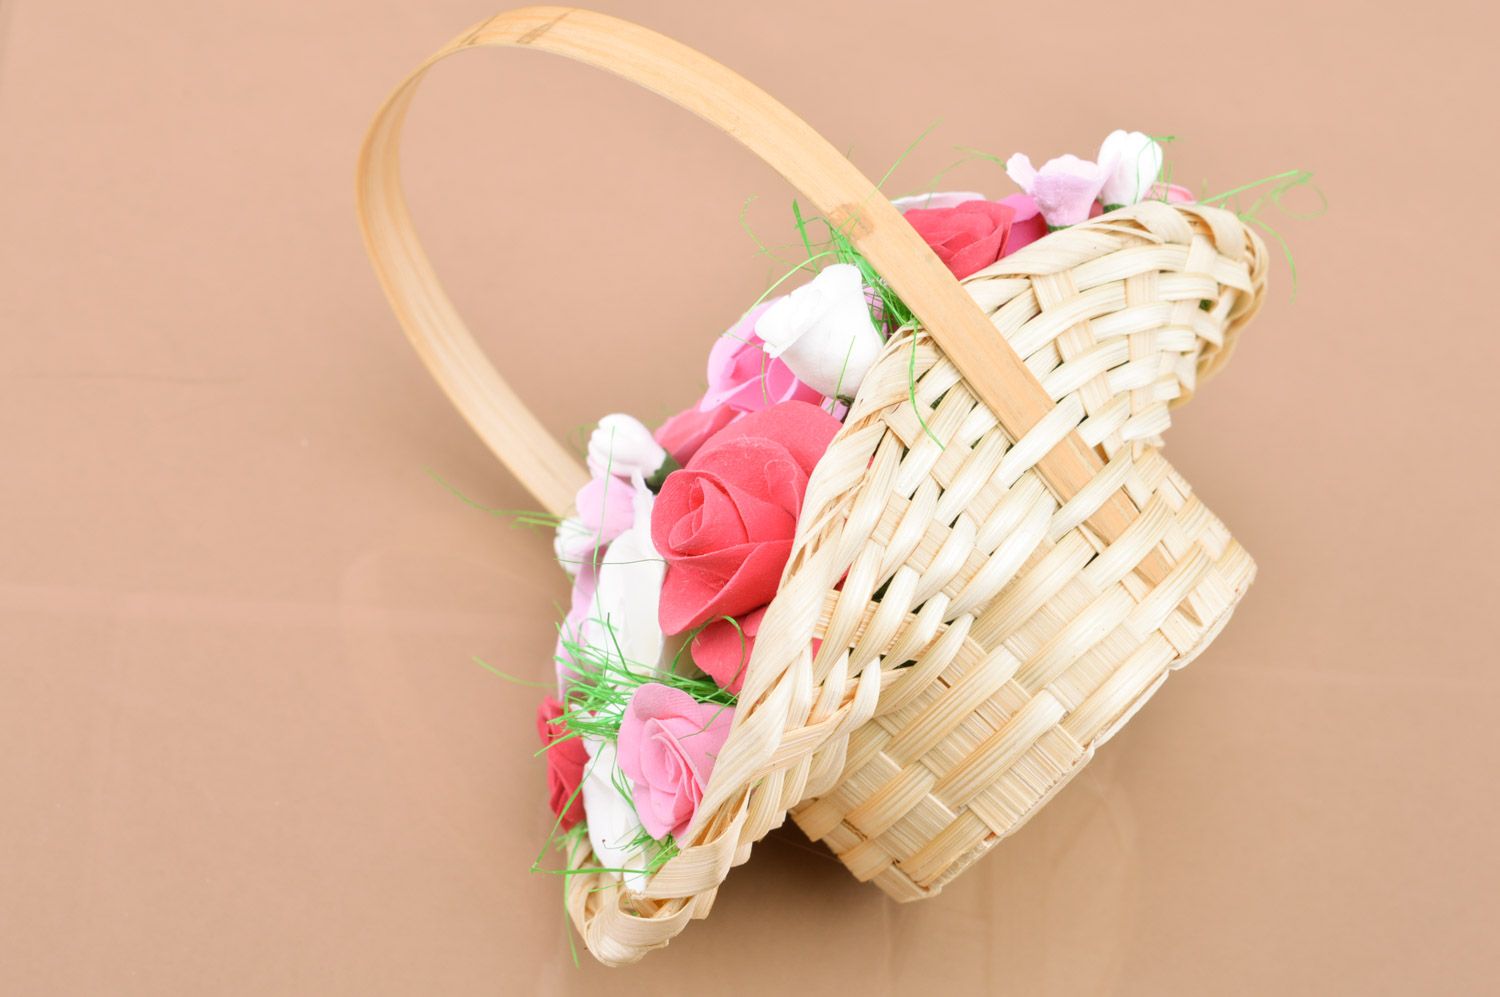 Woven basket with handmade polymer clay flowers for home decor photo 4